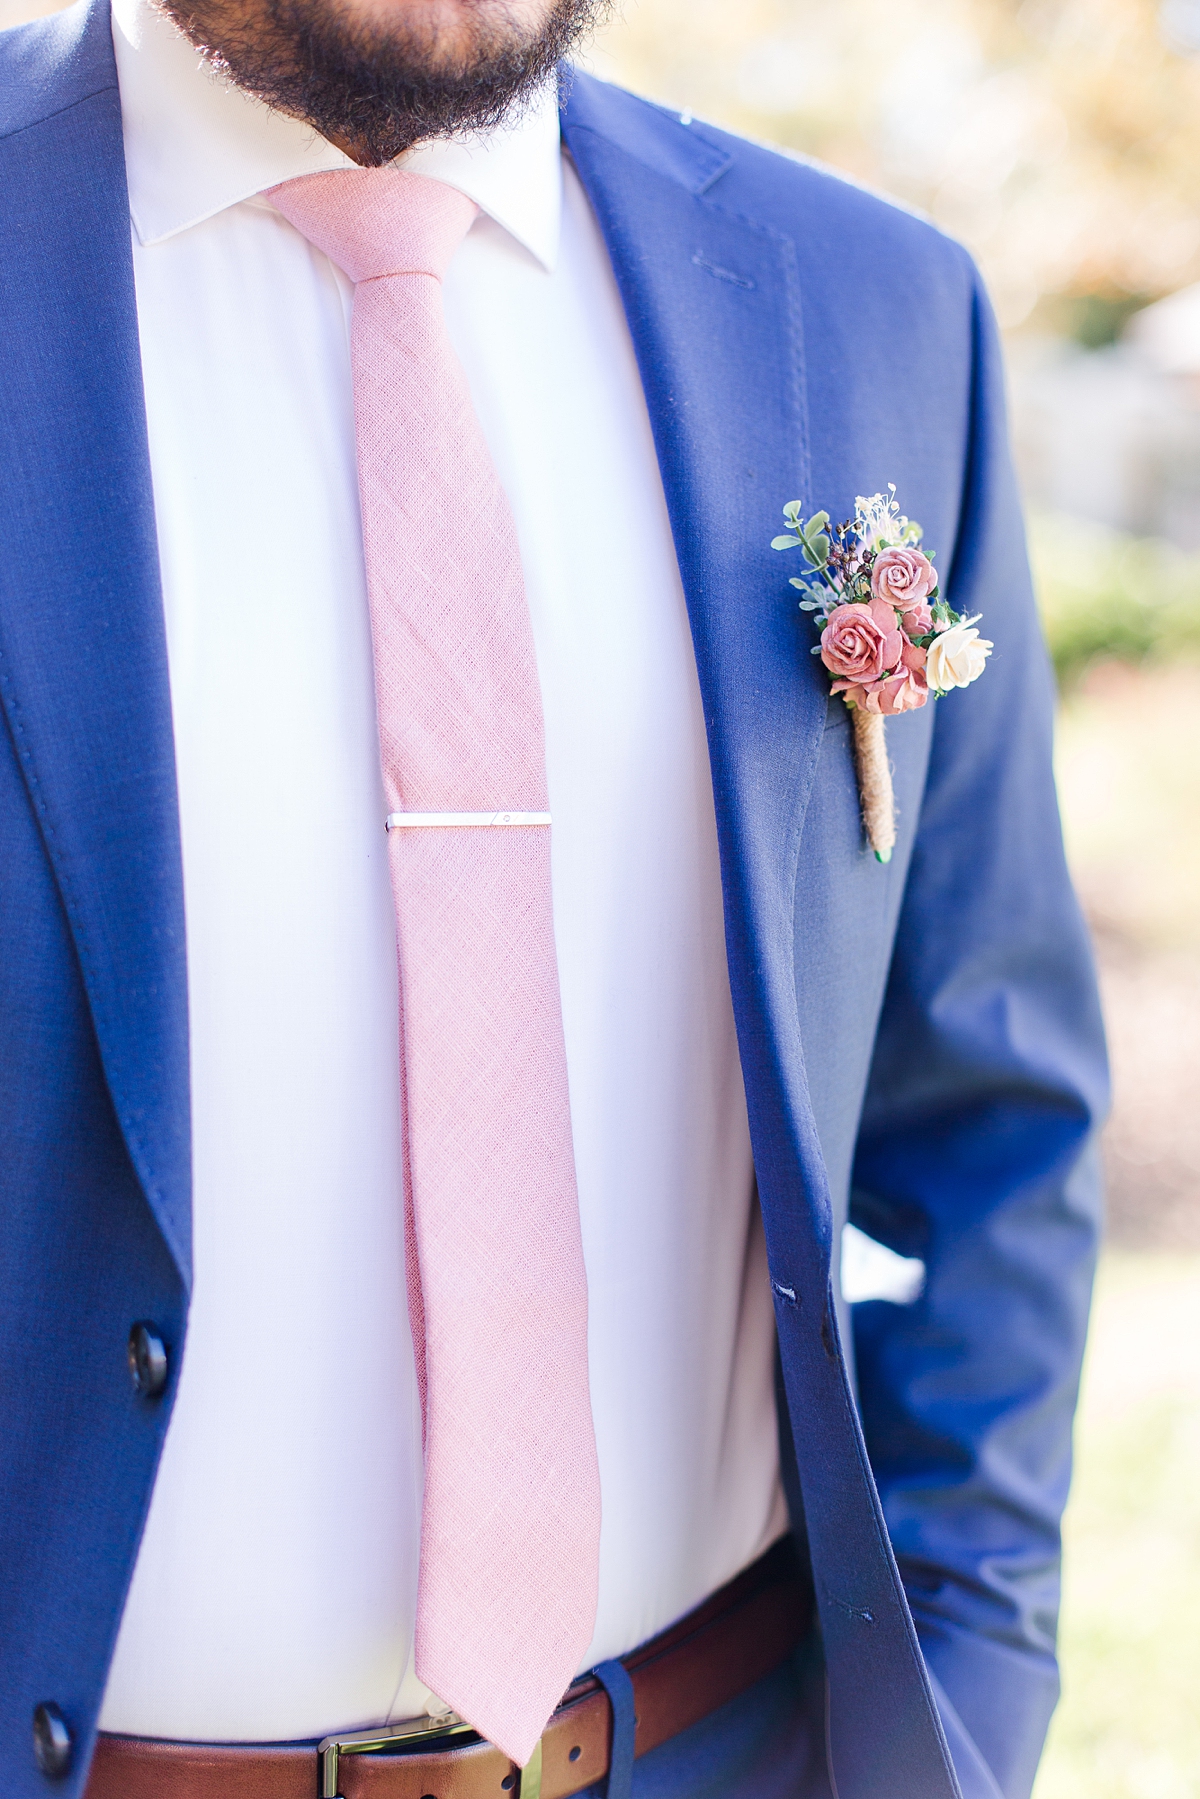 Groom Portraits with Blue Suit and Blush Tie at Virginia Cliffe Inn Wedding. Richmond Wedding Photographer Kailey Brianne Photography.